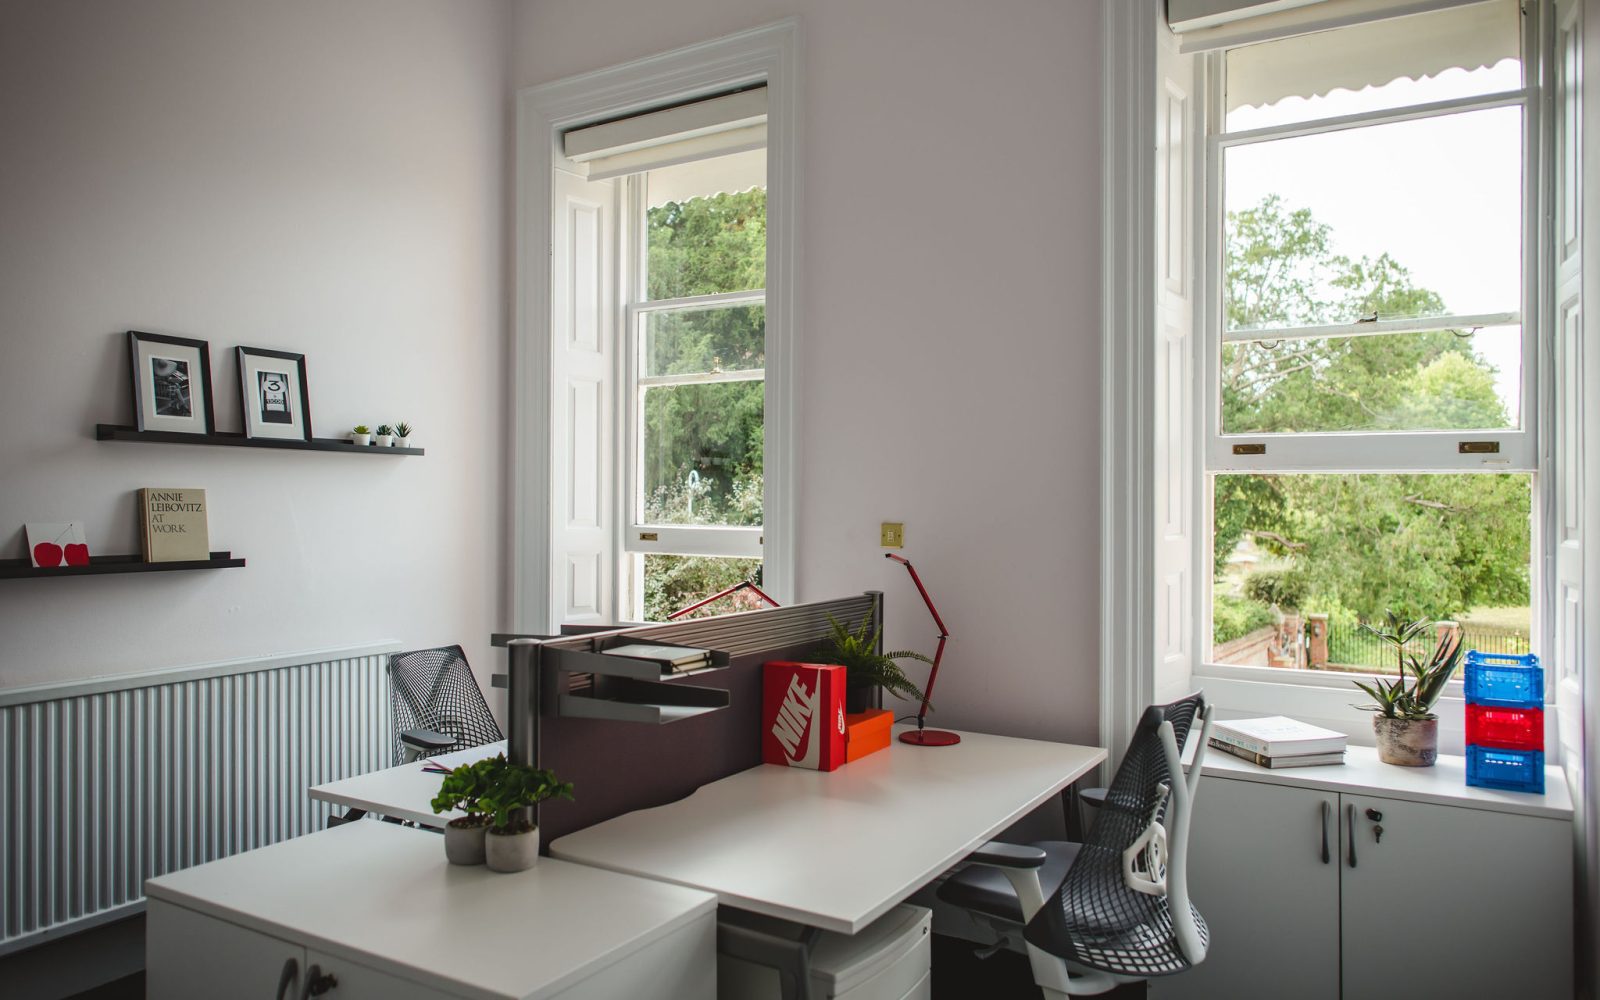 Our serviced offices in Leatherhead are bright and light office spaces designed for focus and free from distraction